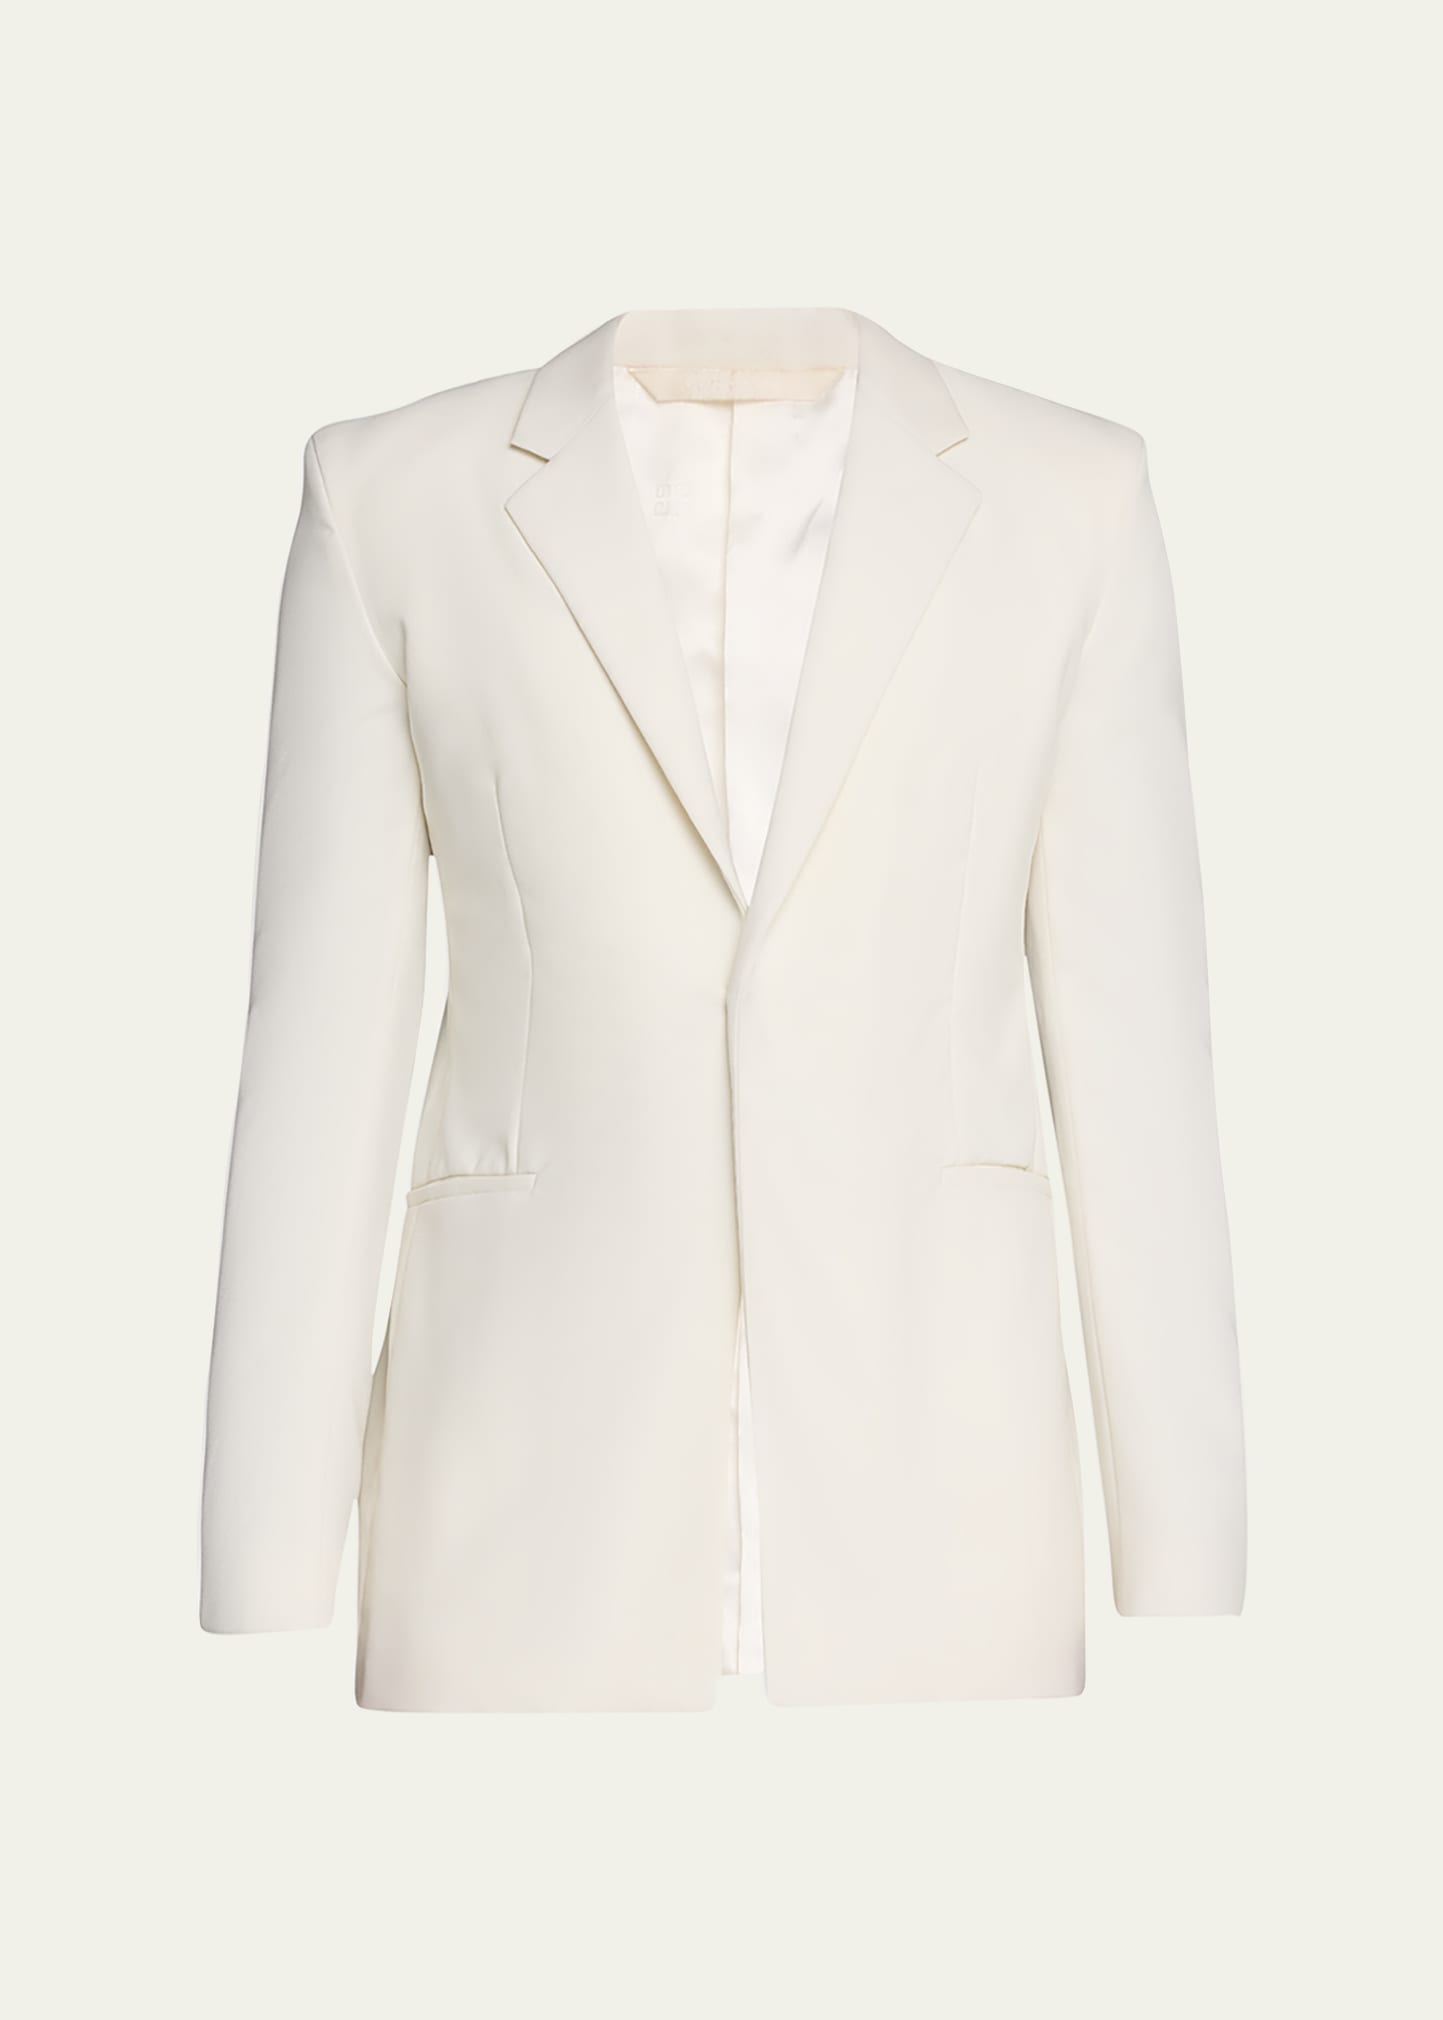 Givenchy Men's Extra-fitted Dinner Jacket In White